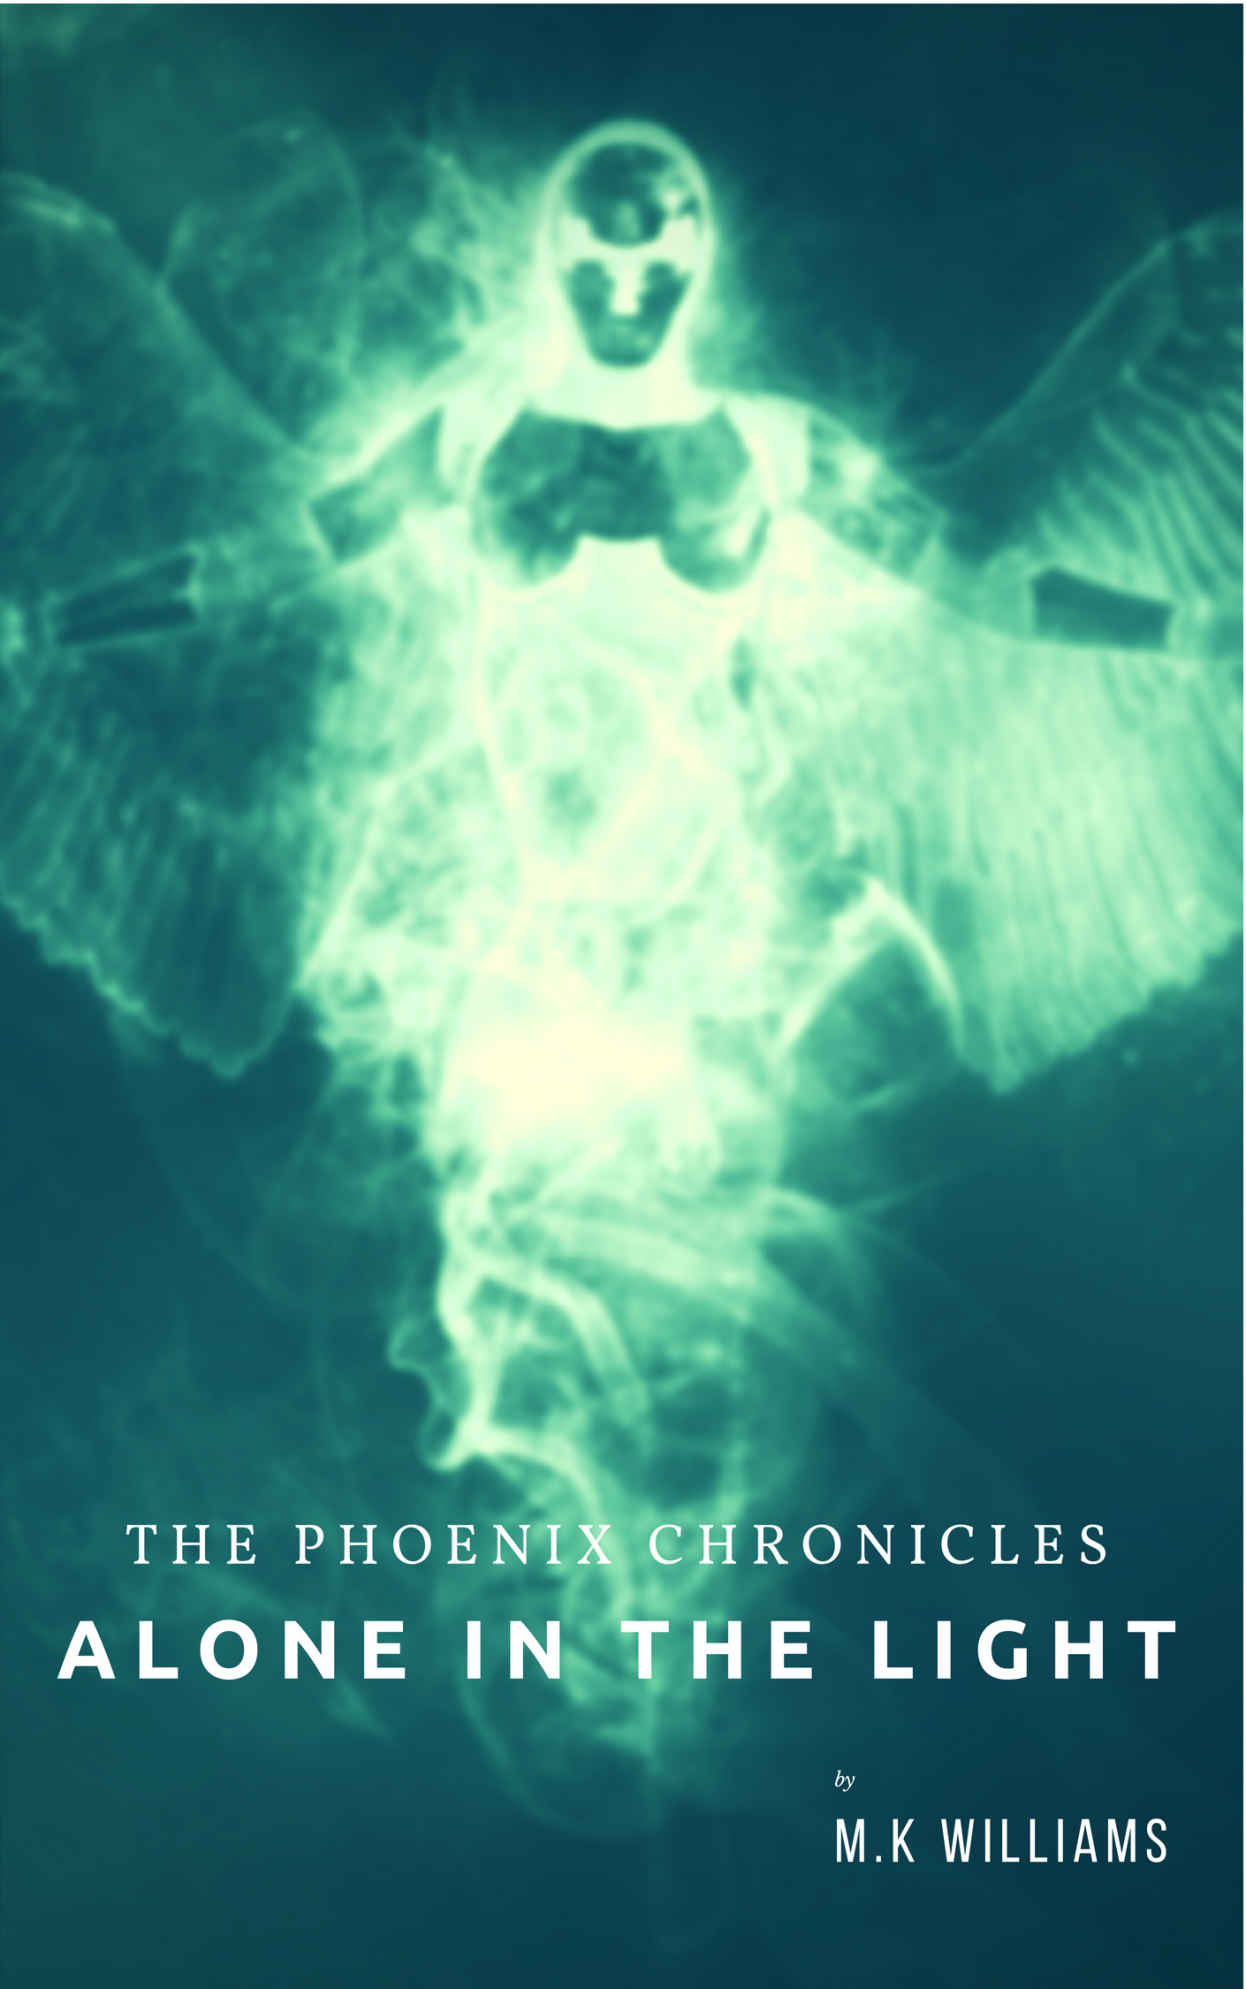 The Phoenix Chronicles_Alone in the Light